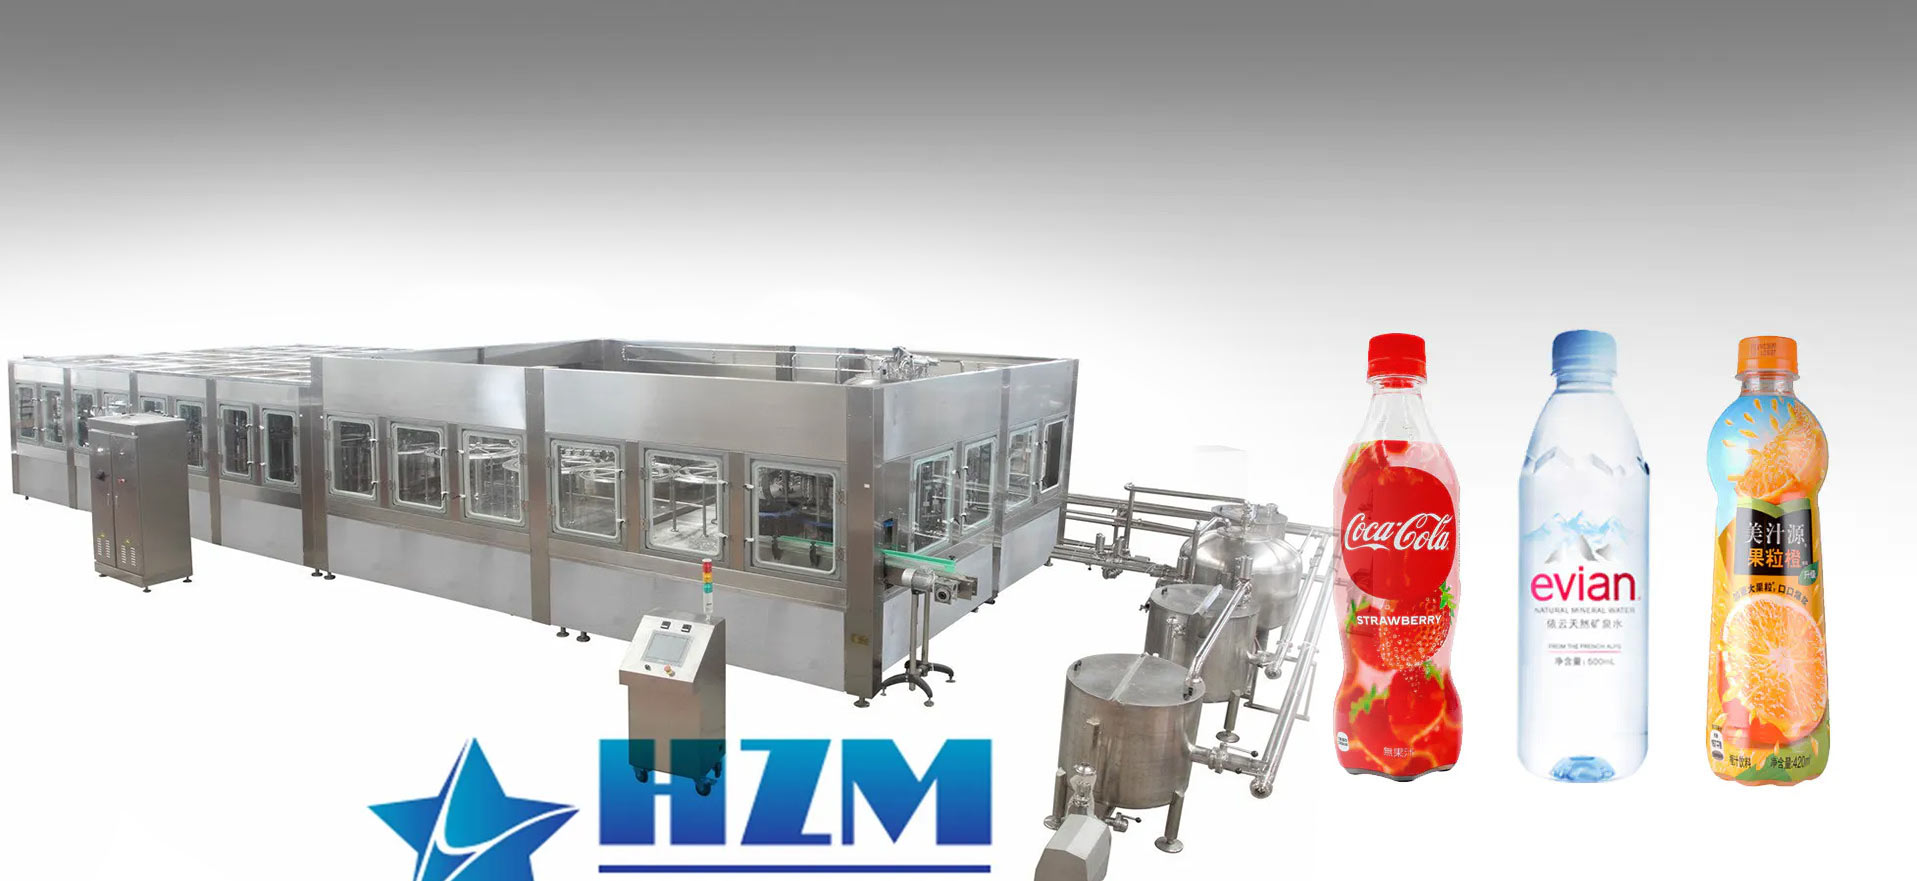 Filling Machine, Classification, Workflow, Instructions for Use, Procurement